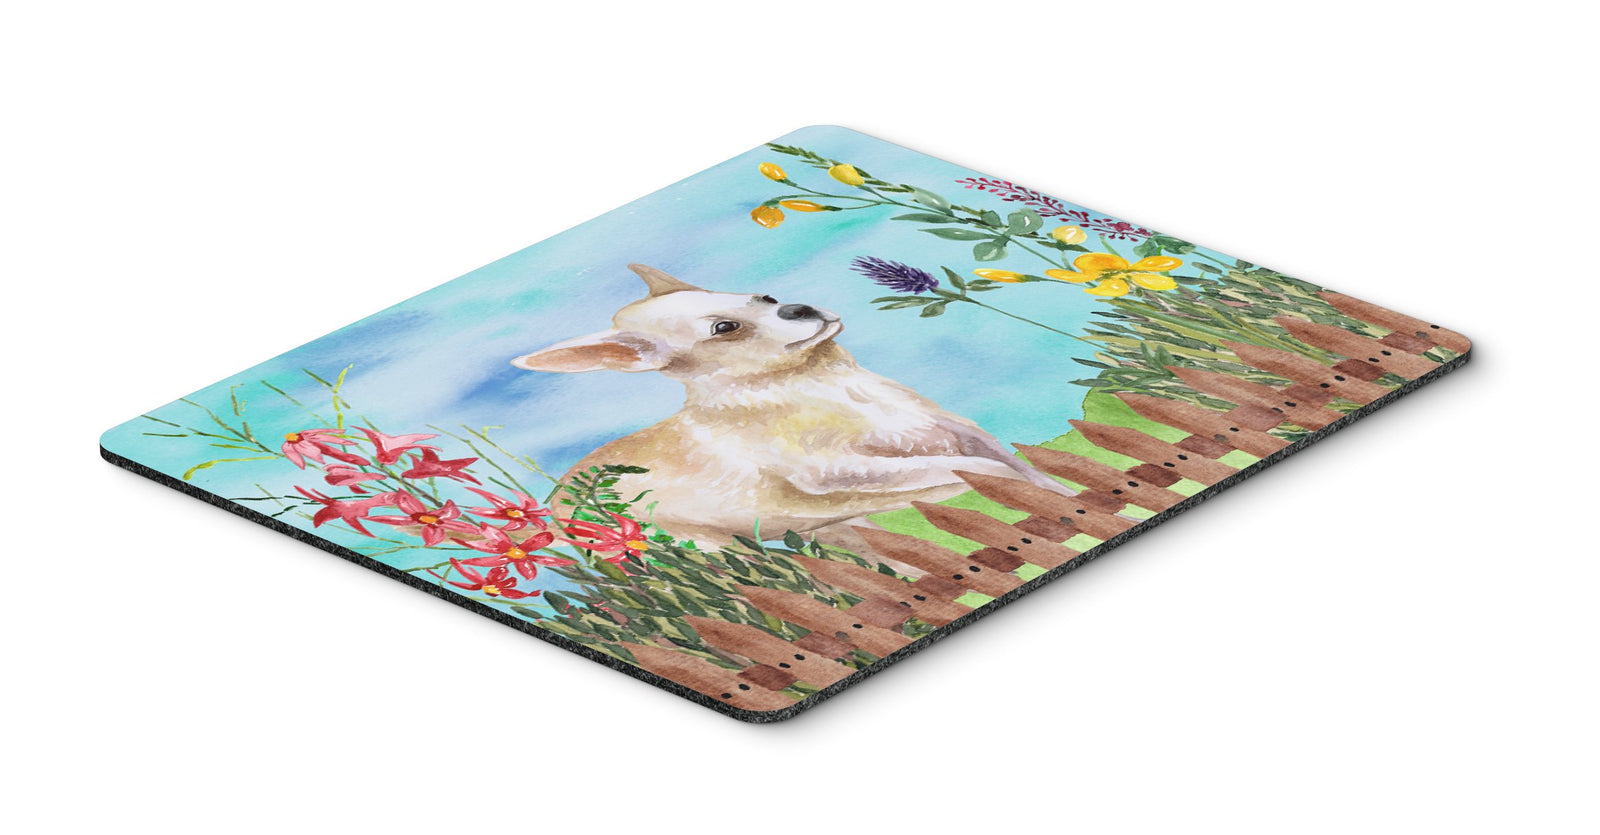 Chihuahua Leg up Spring Mouse Pad, Hot Pad or Trivet CK1259MP by Caroline's Treasures